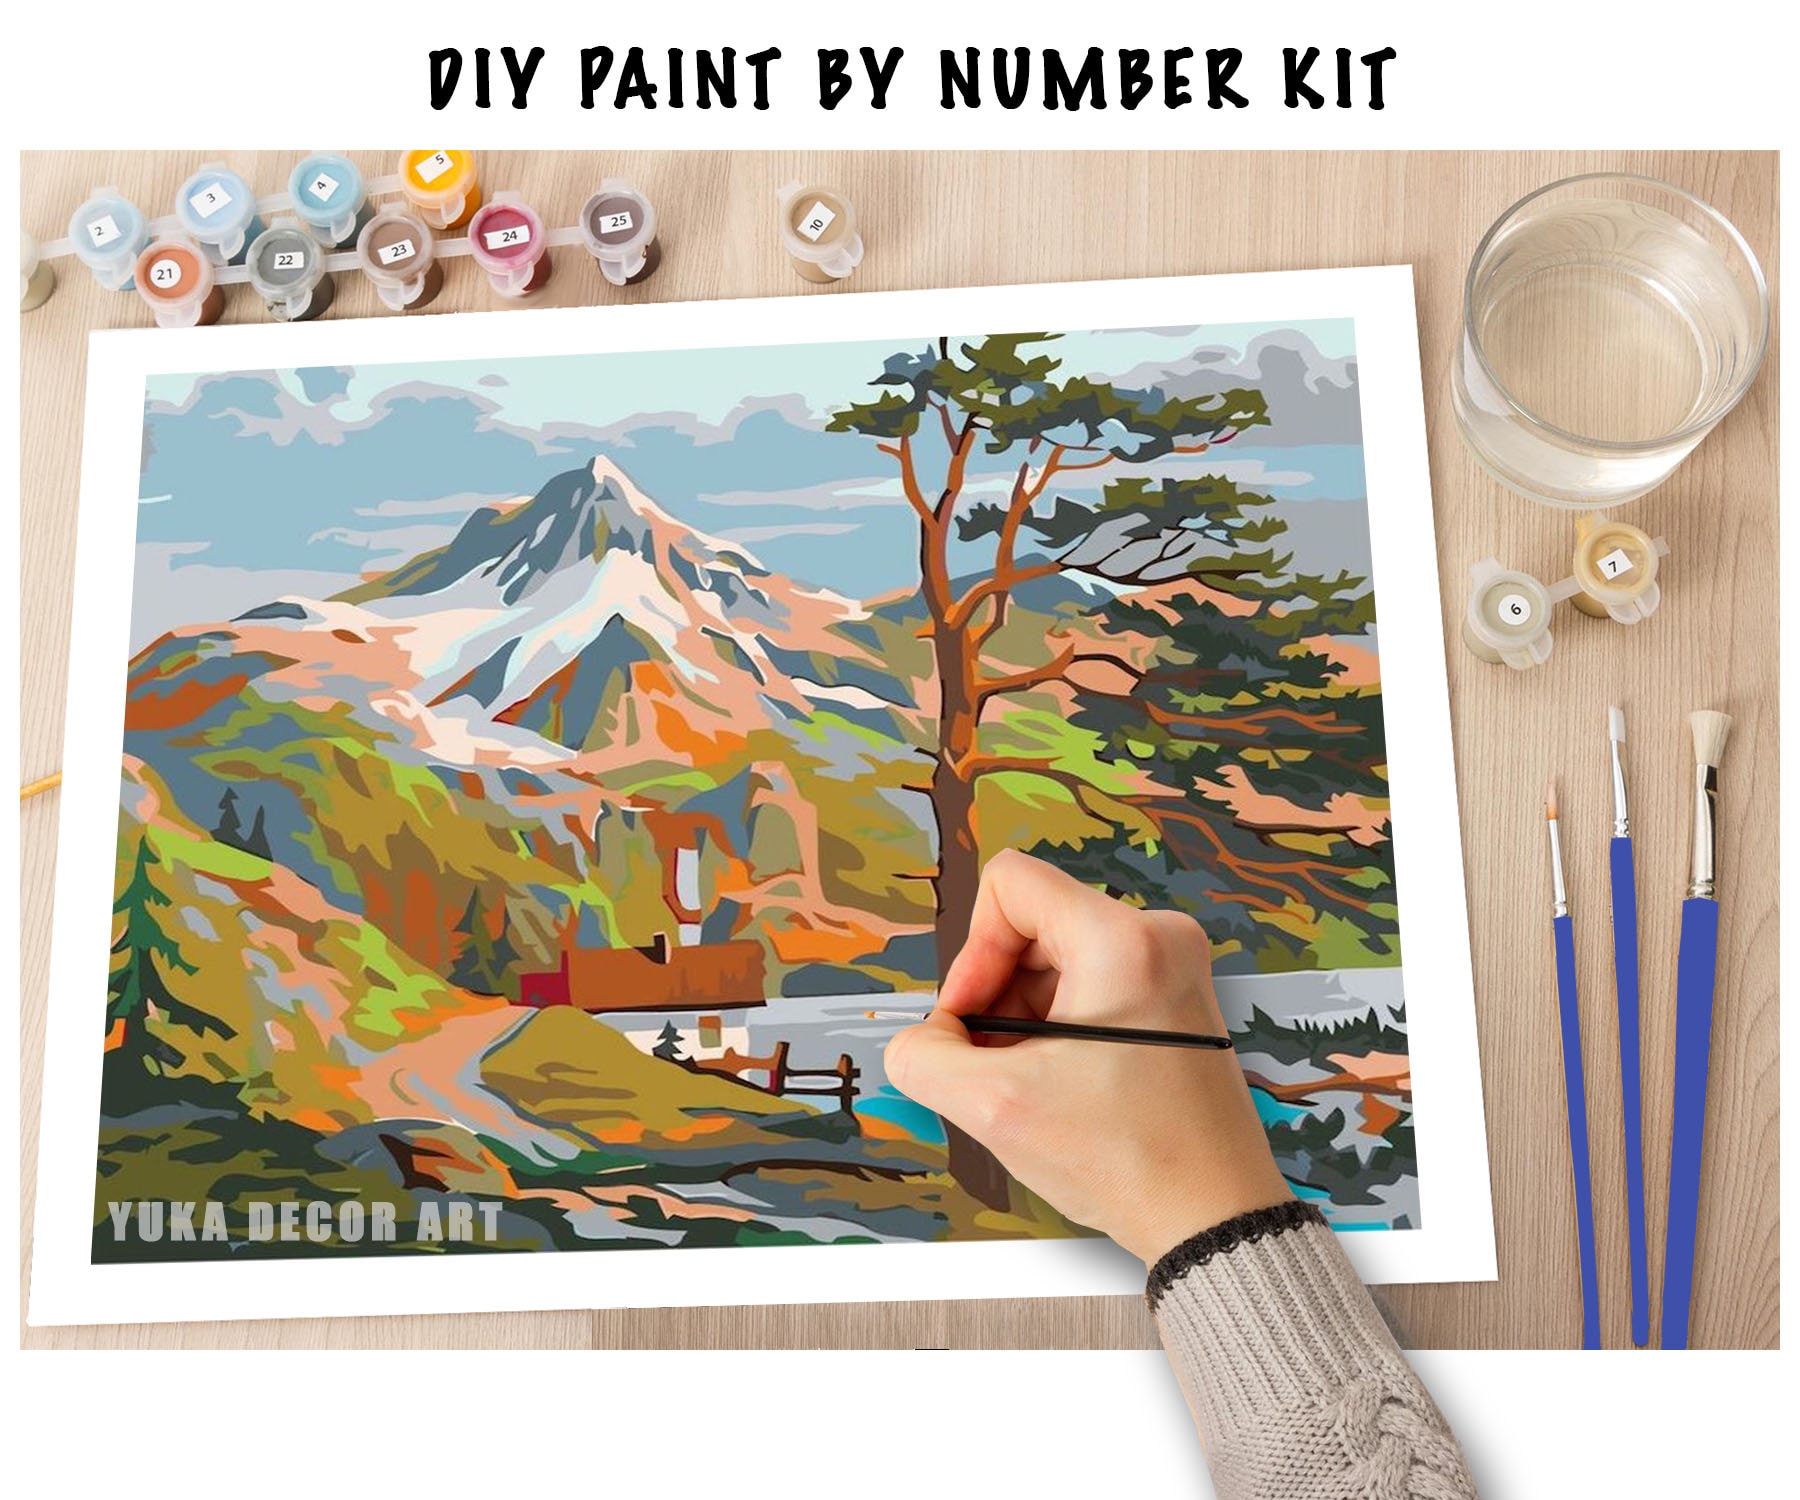  CYNART Paint by Numbers for Adults Beginner, DIY Mountain Adult  Paint by Numbers Kits on Landscape Painting Kits for Kids,Painting by  Numbers Perfect for Gift Decor - 12x16inch(Without Frame)